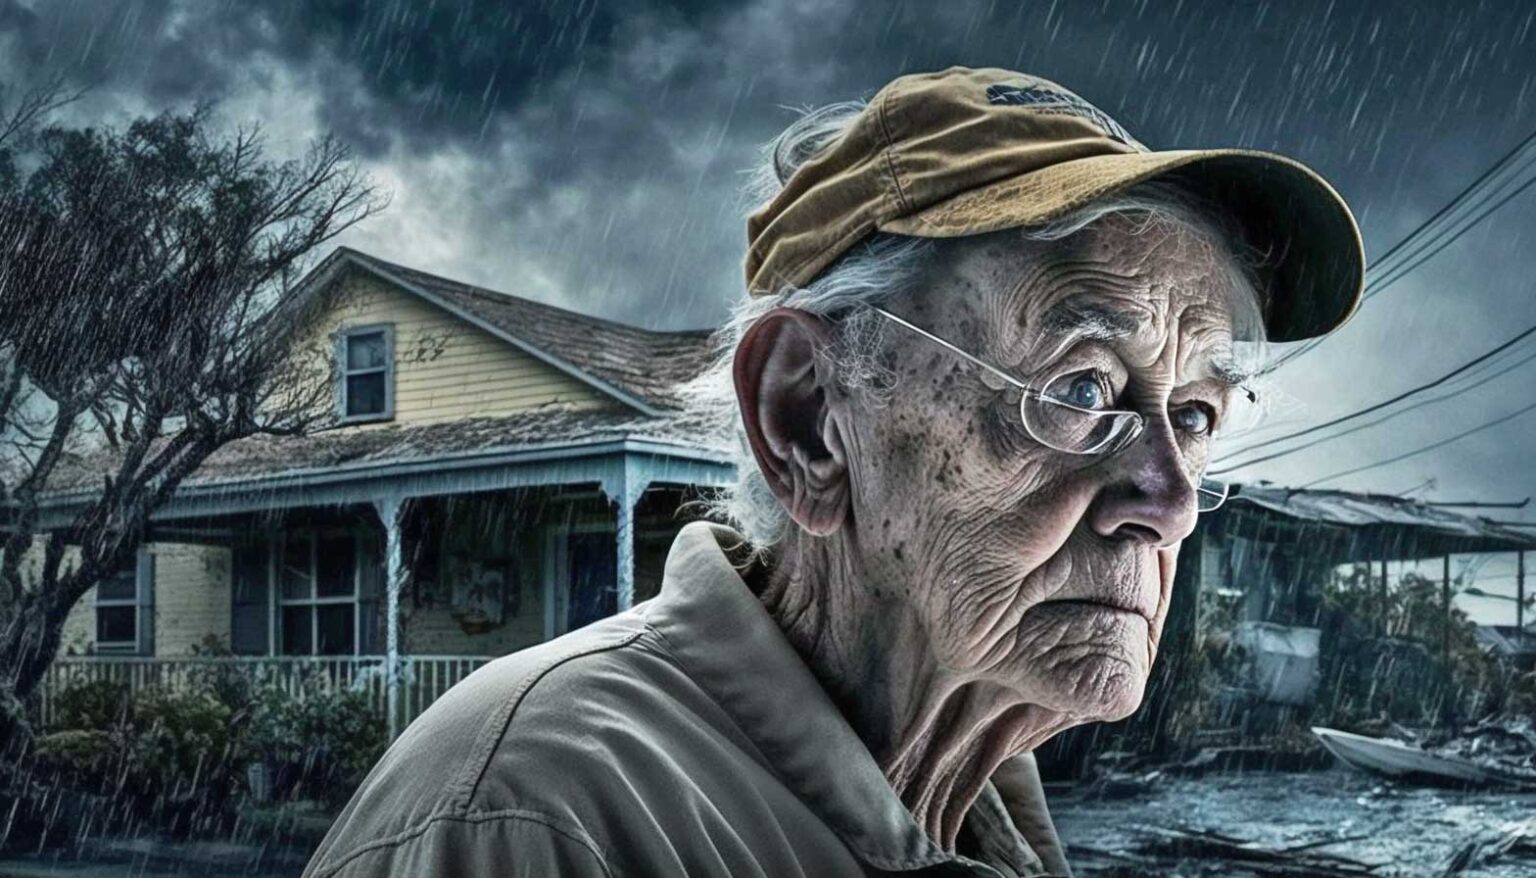 You are currently viewing University Of Michigan Study Shows Increased Risk Of Death For People With Dementia After Hurricane Exposure